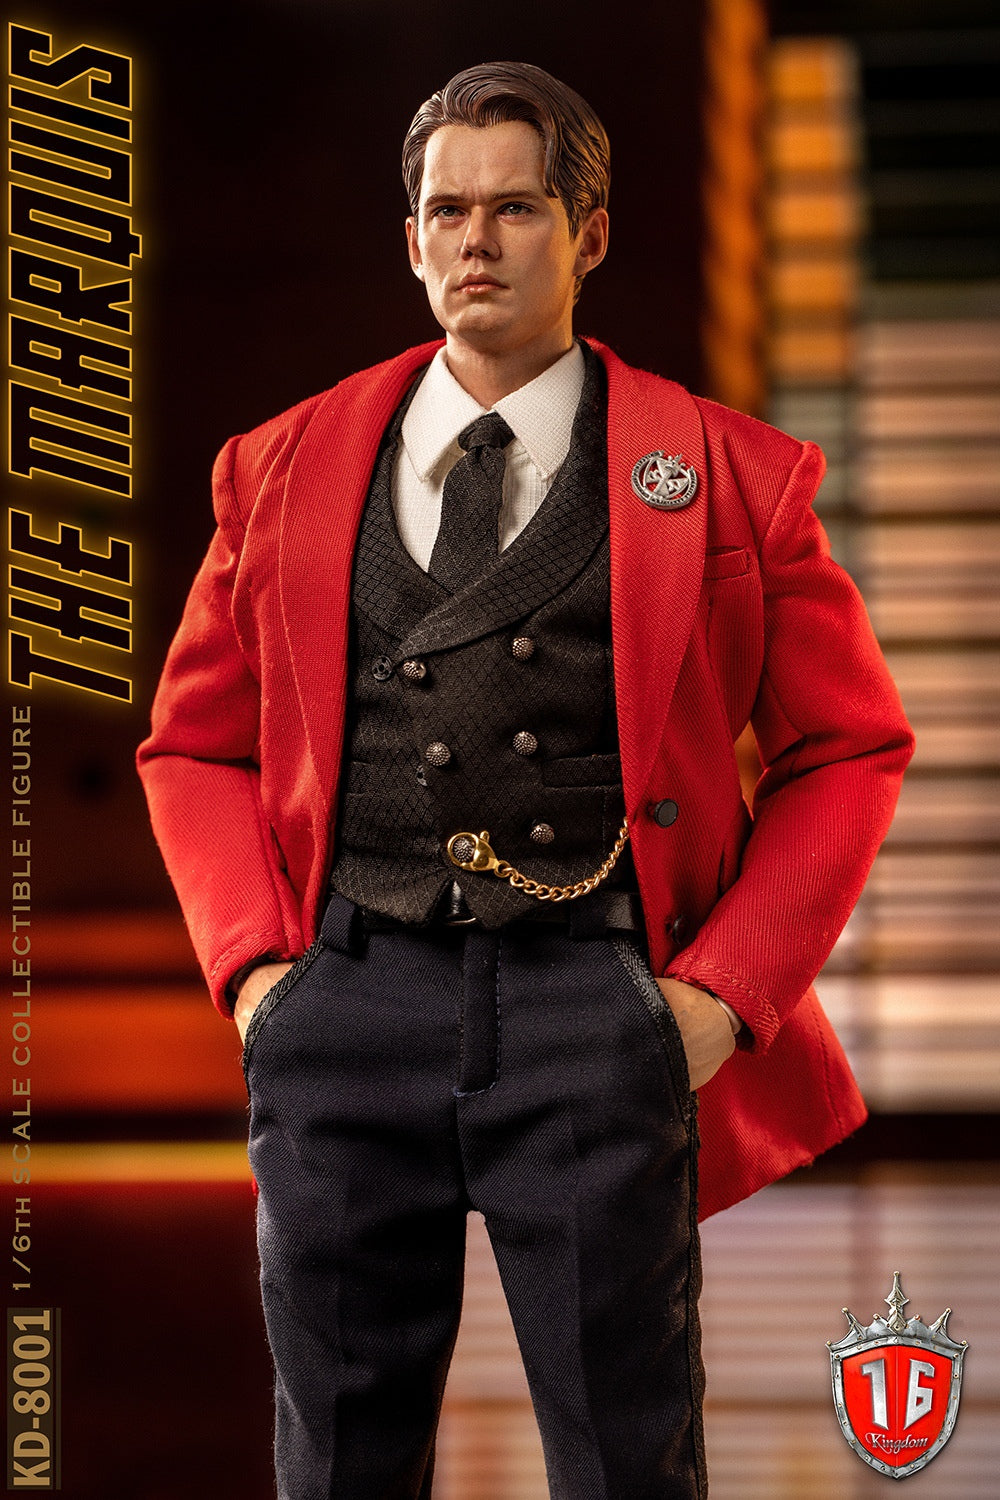 Kingdom - KD-8001 - The Marquis (1/6 Scale) - Marvelous Toys